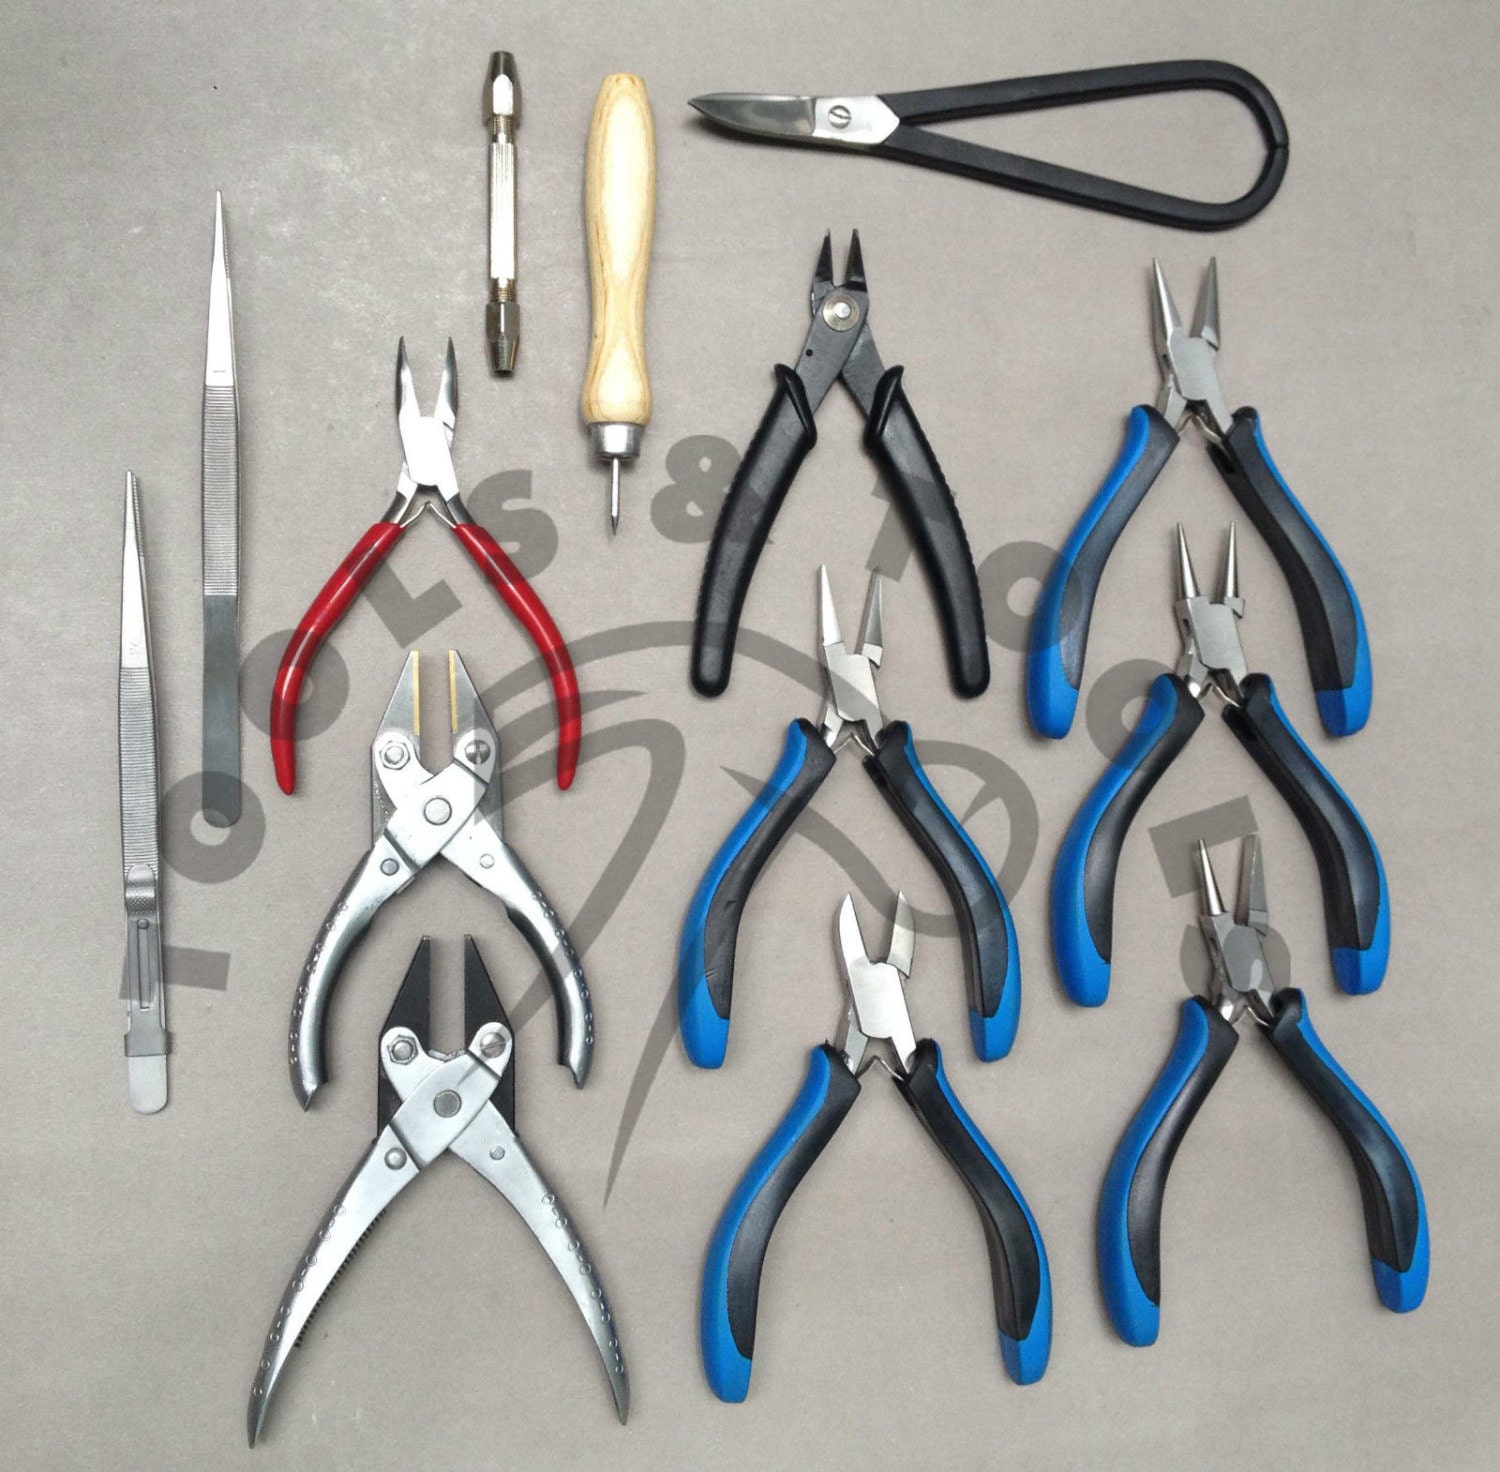 Model tools for cutting, drilling, scribing, and many other hobbies.